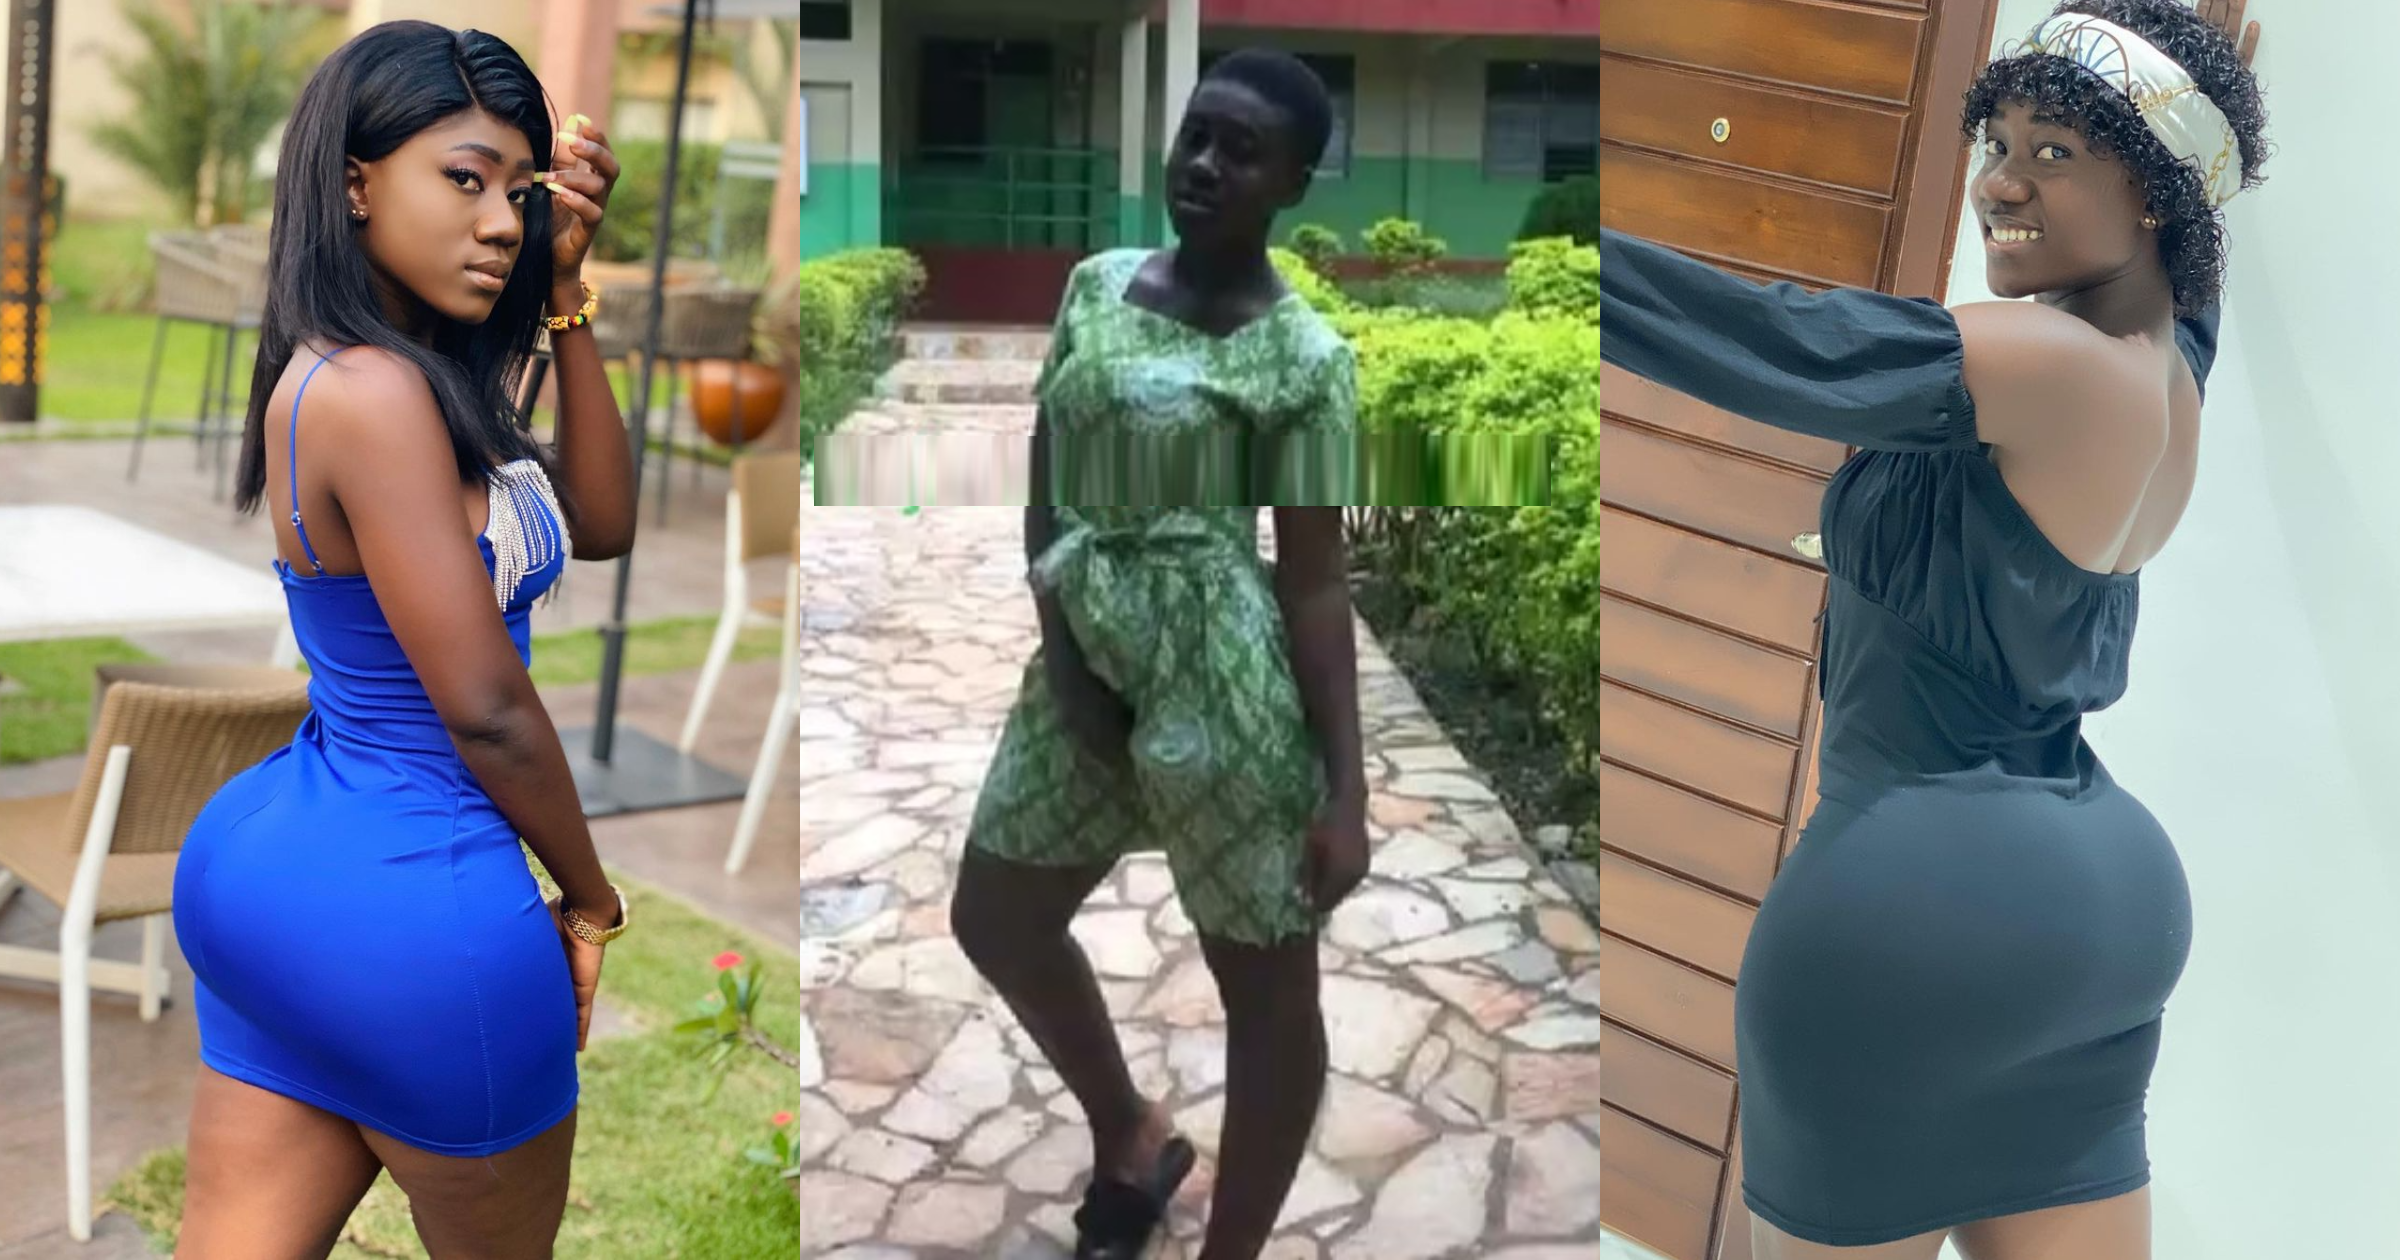 Nana Ama: Meet the lady who graduated as the 2020 valedictorian and over-all Best Student of Regent University